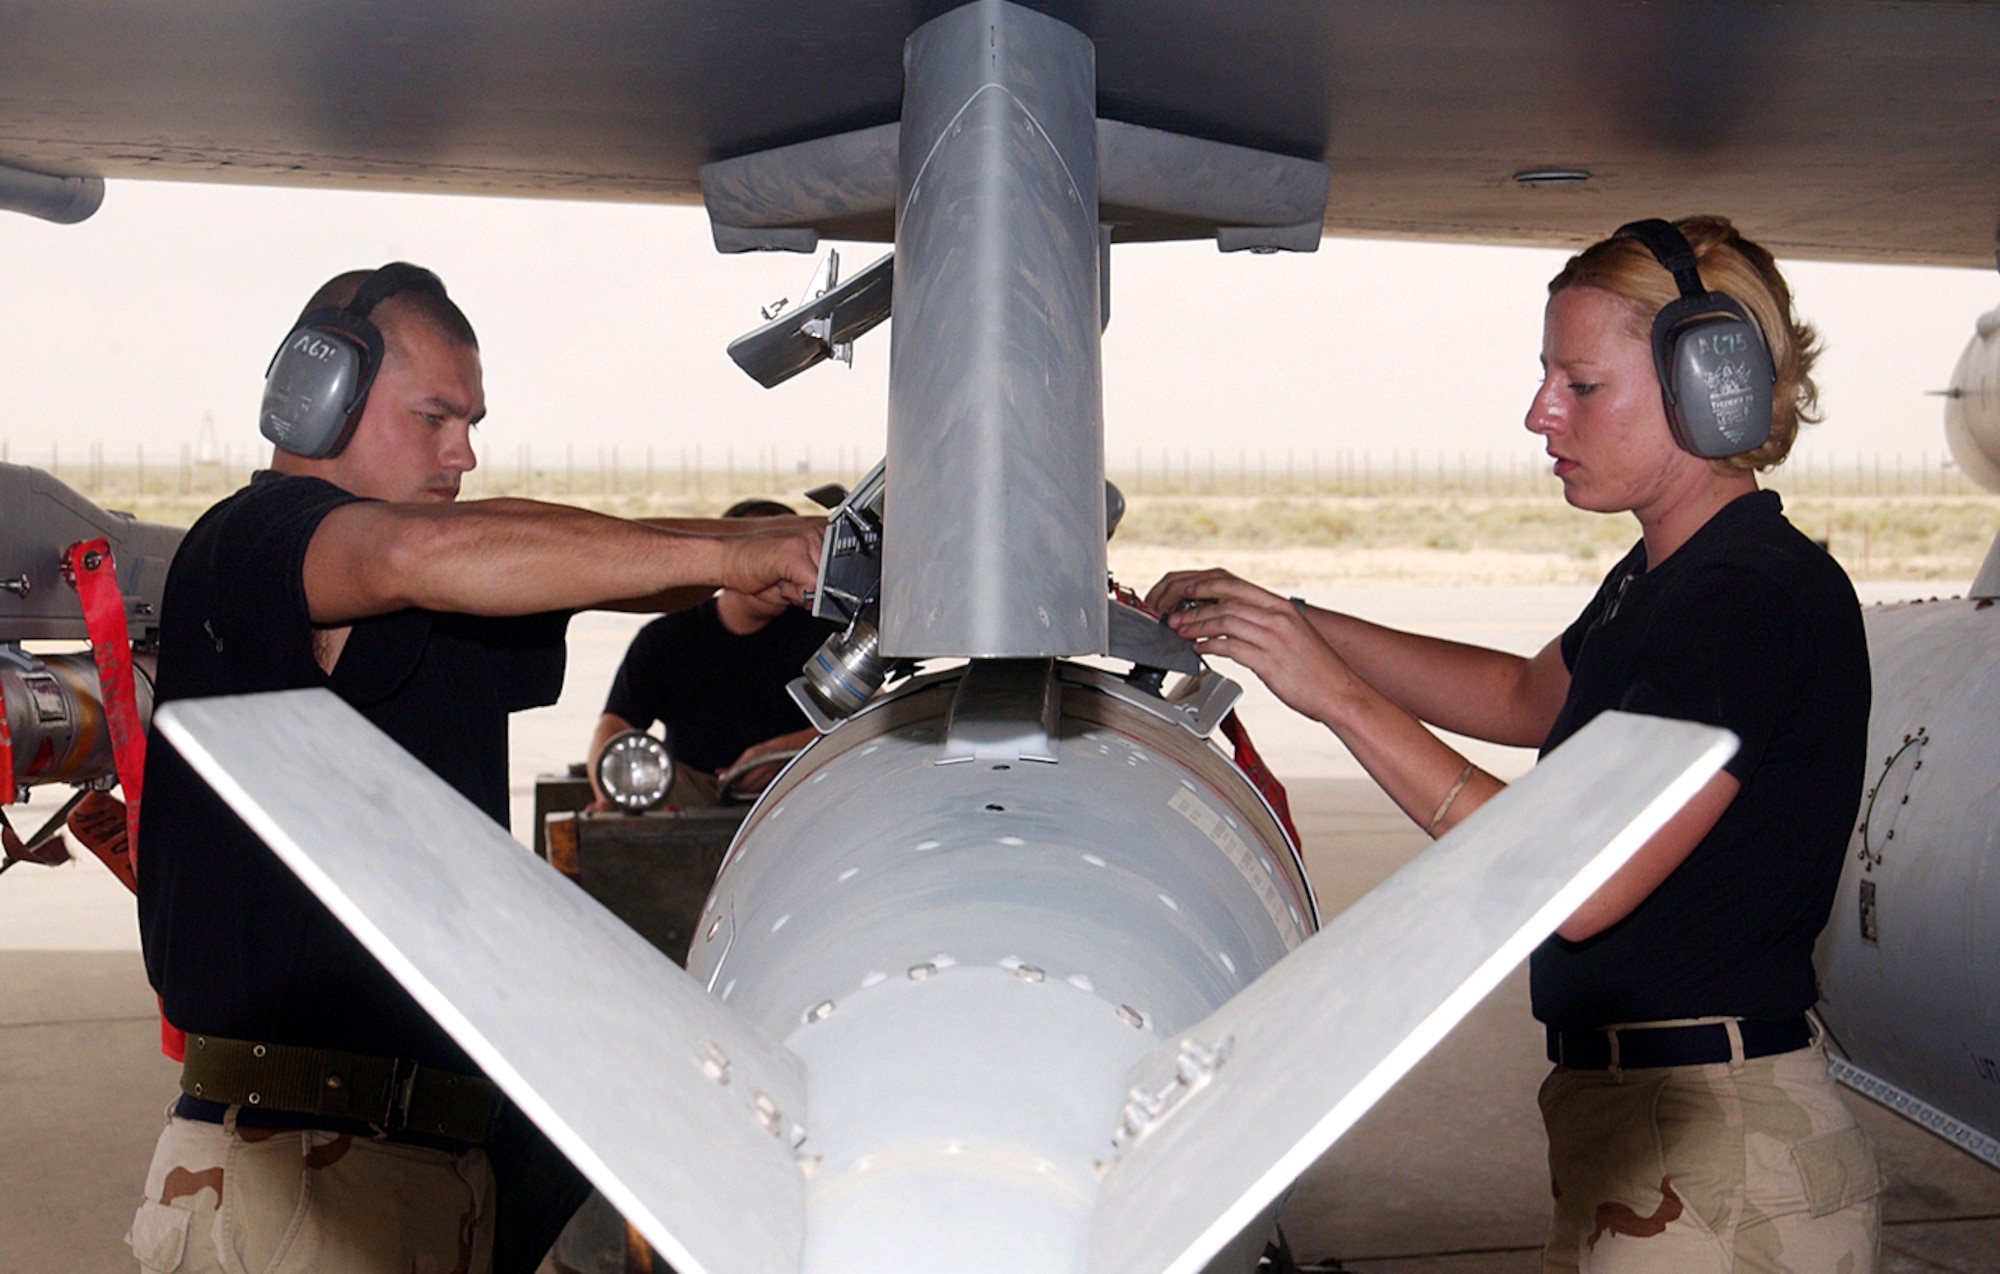 OPERATION IRAQI FREEDOM -- Staff Sgt. Mike Amado and Airman 1st Class Stacy Brenenstall load a joint direct attack munition onto an F-16 Fighting Falcon at a desert air base.  Both airmen are members of the 332nd Expeditionary Aircraft Maintenance Squadron.  (U.S. Air Force photo by Master Sgt. Stefan Alford)
                   